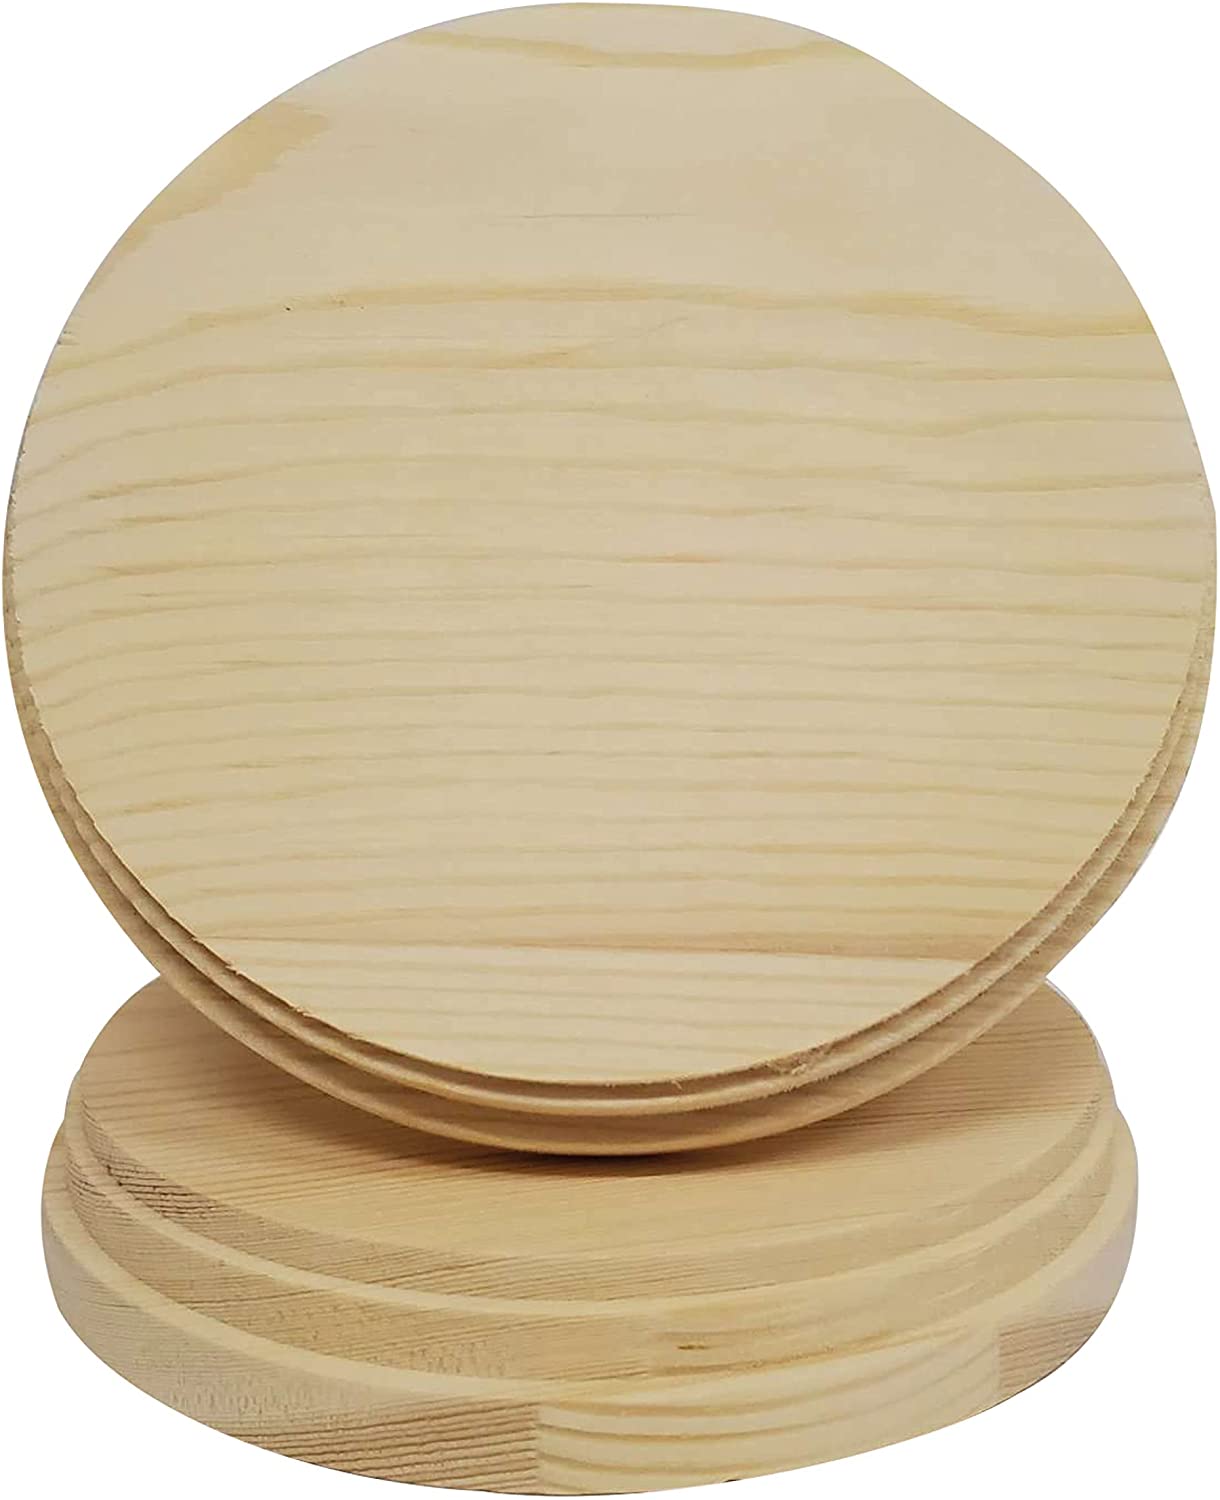 Round Wooden Plaques for Crafts, Natural Pine Unfinished Wood Plaque, Great Wood Base for DIY Craft Projects & Home Decoration - 5 inch - 2 PCS.